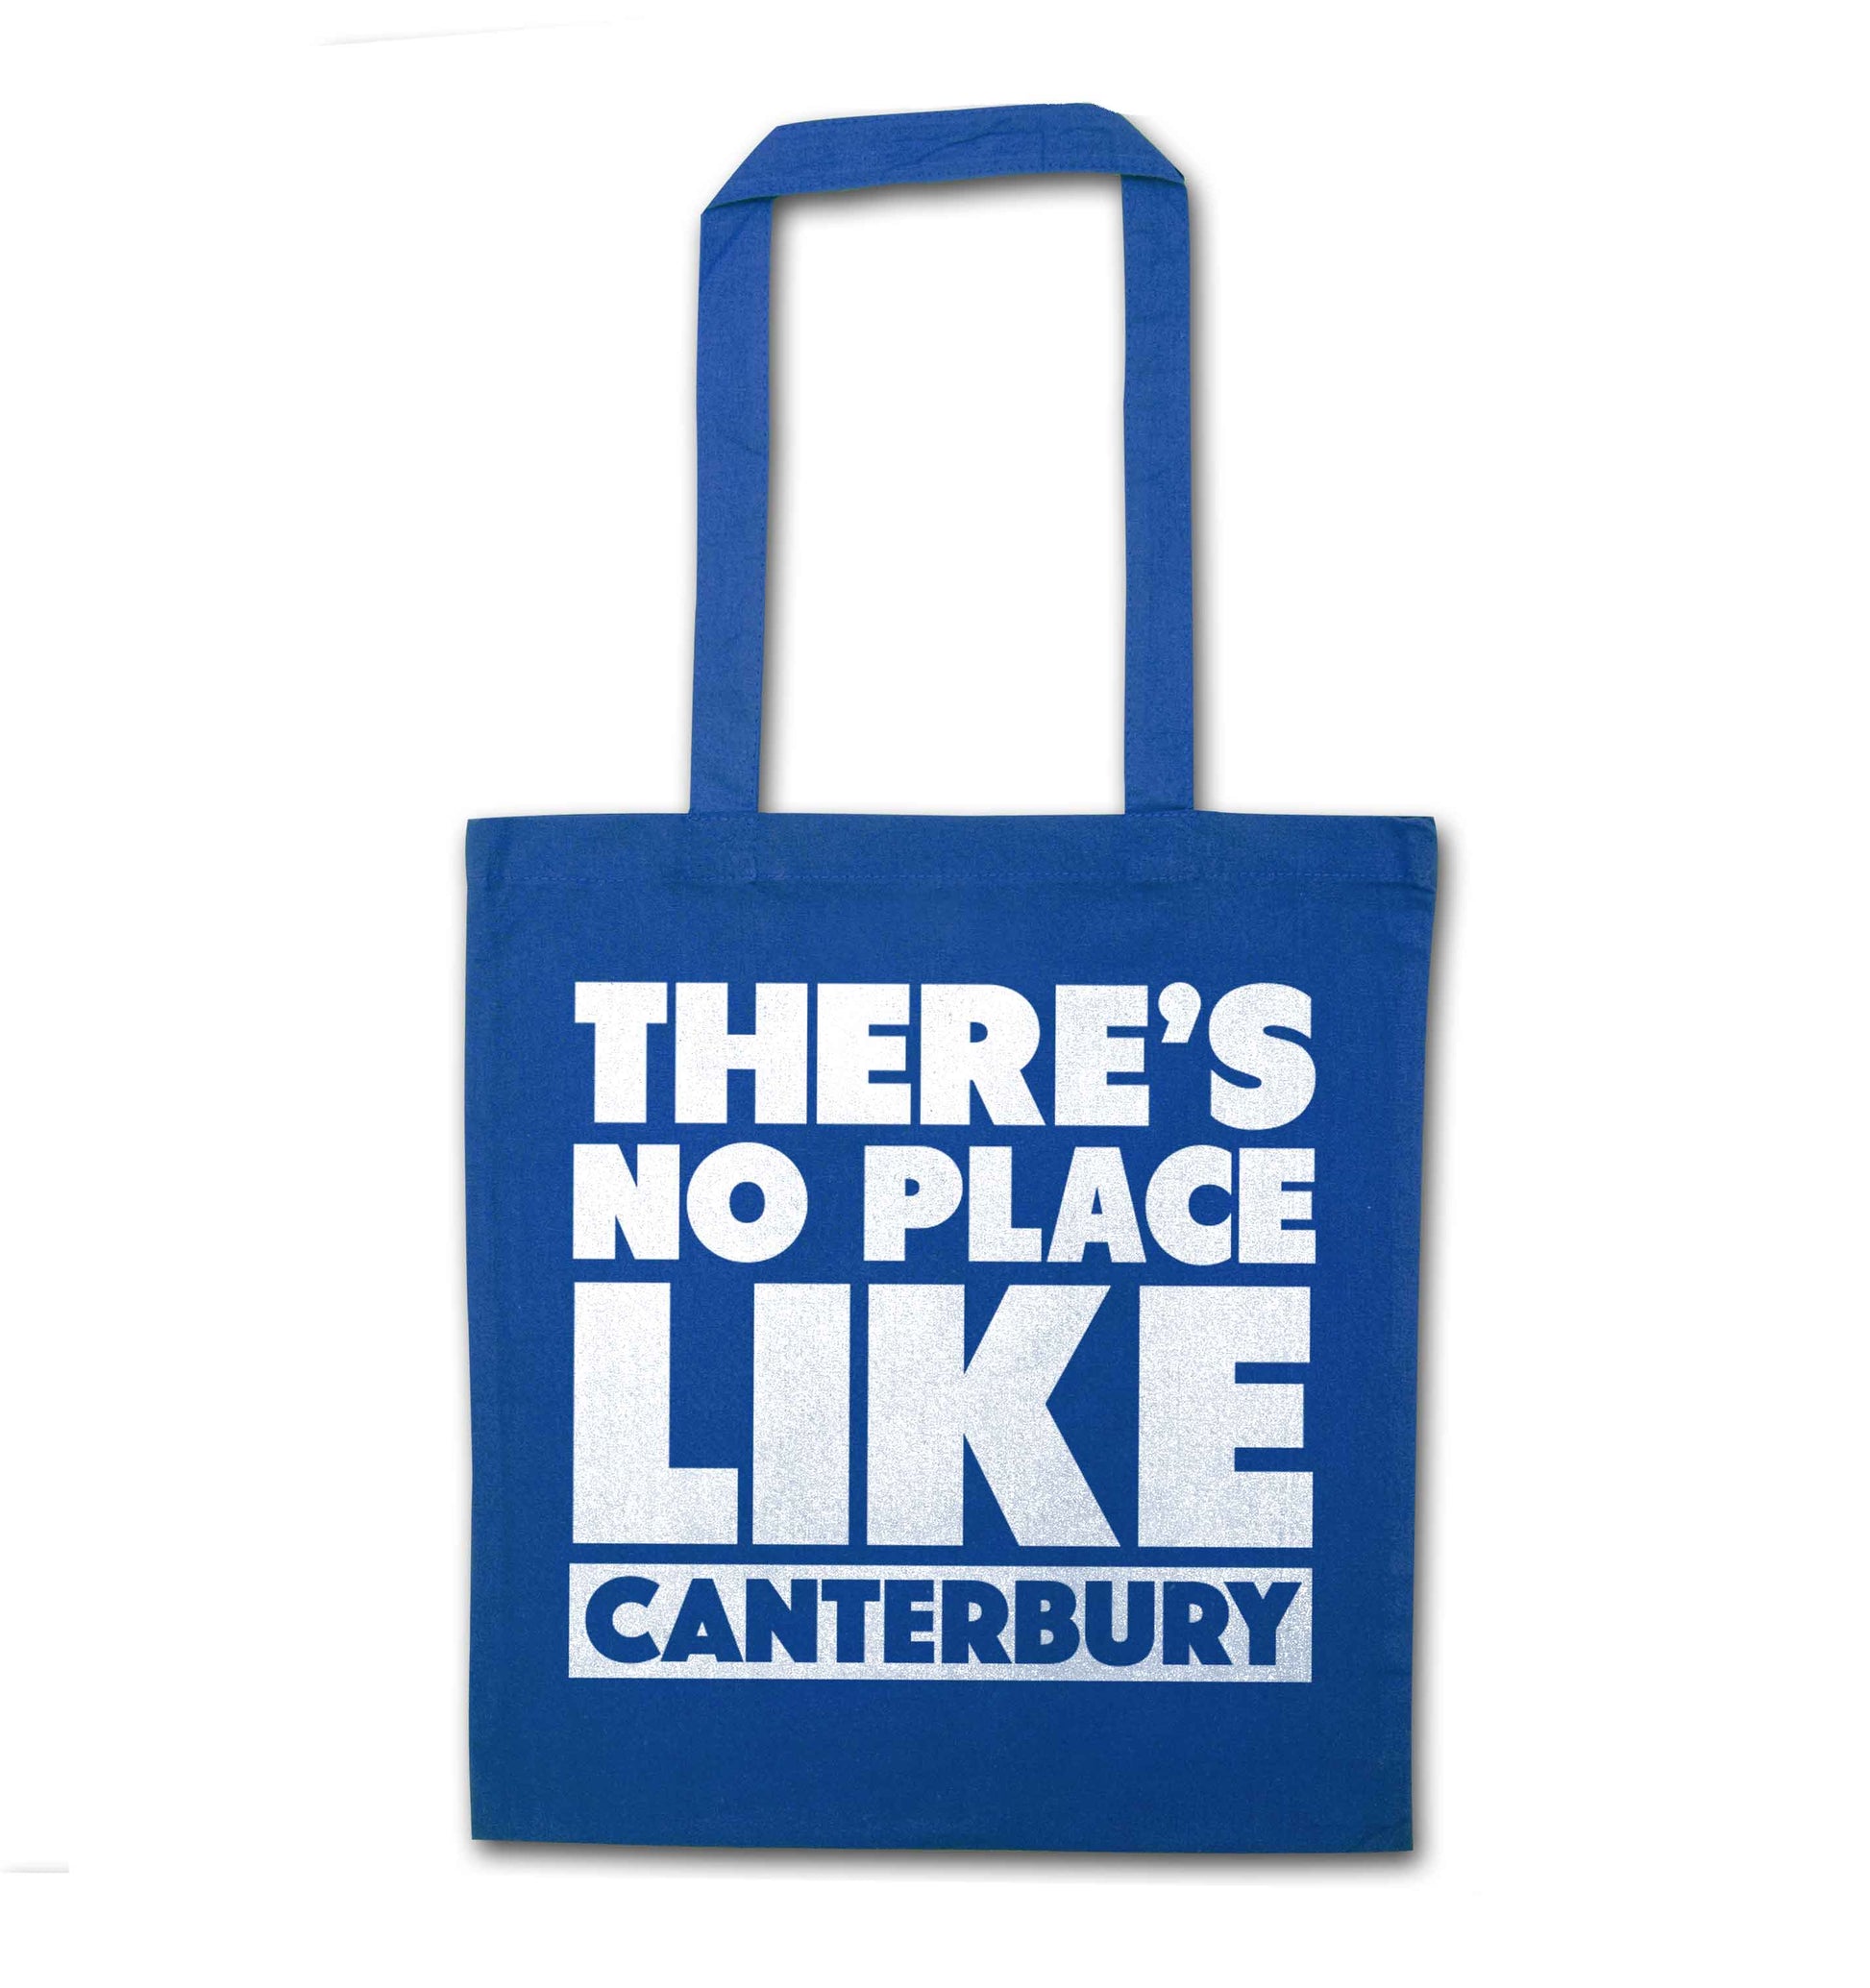 There's no place like Canterbury blue tote bag